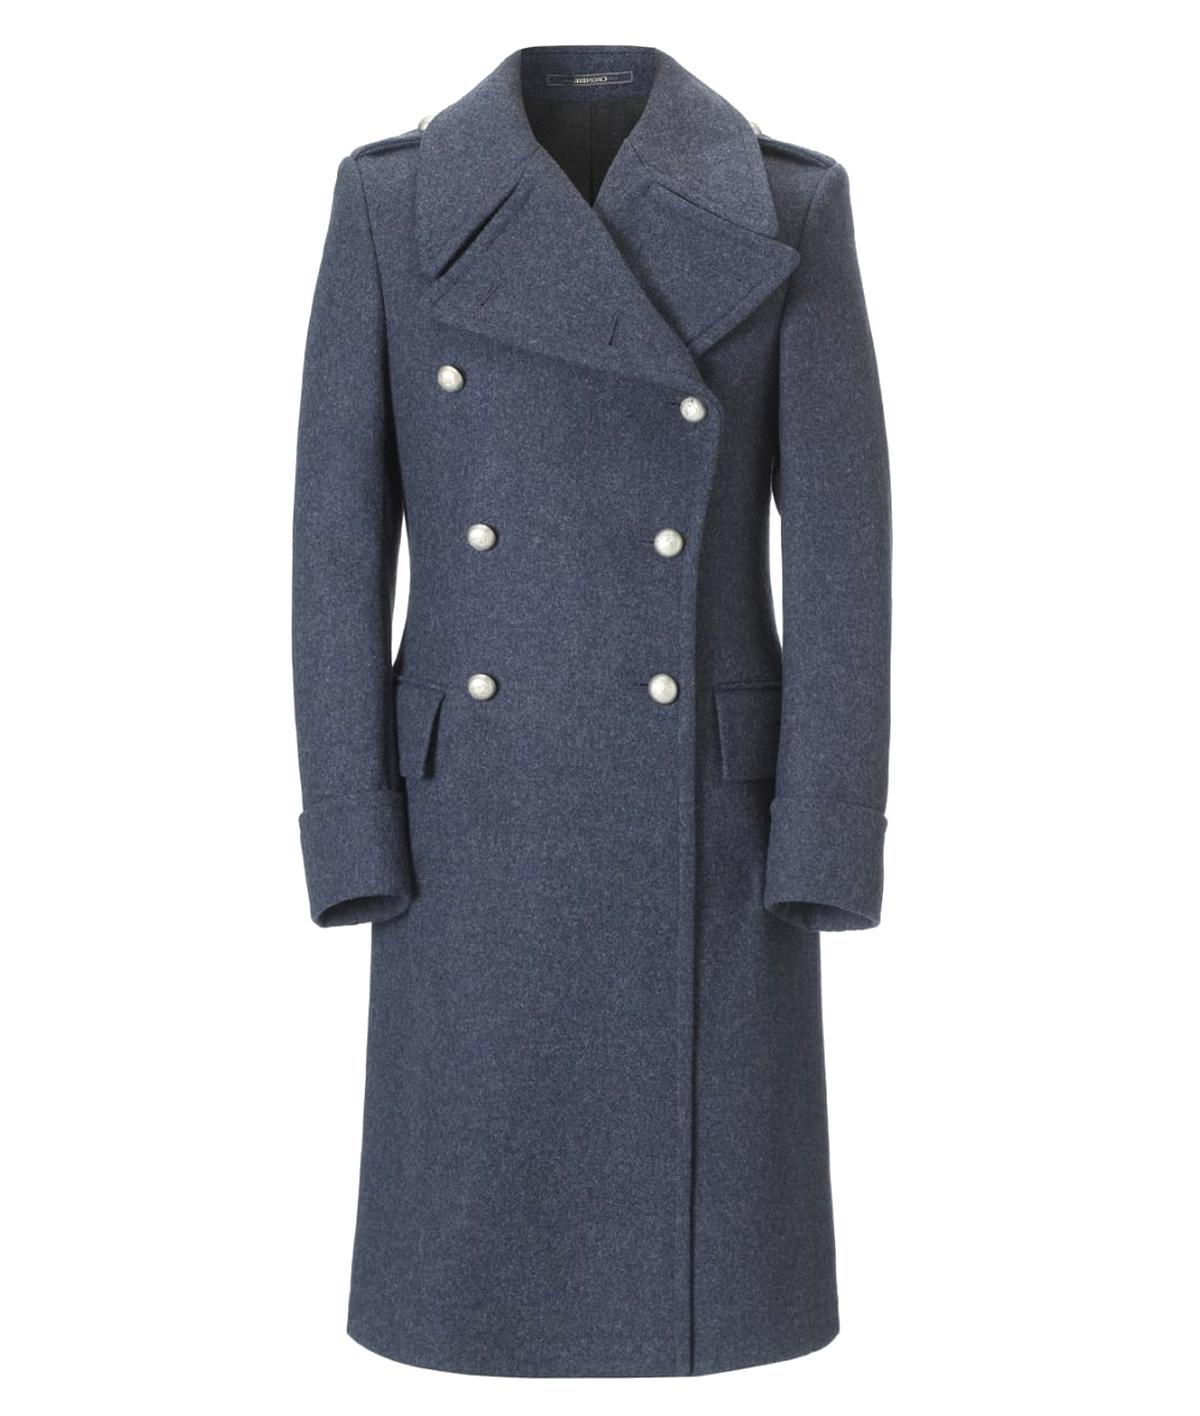 Army Greatcoat for sale in UK | 59 used Army Greatcoats